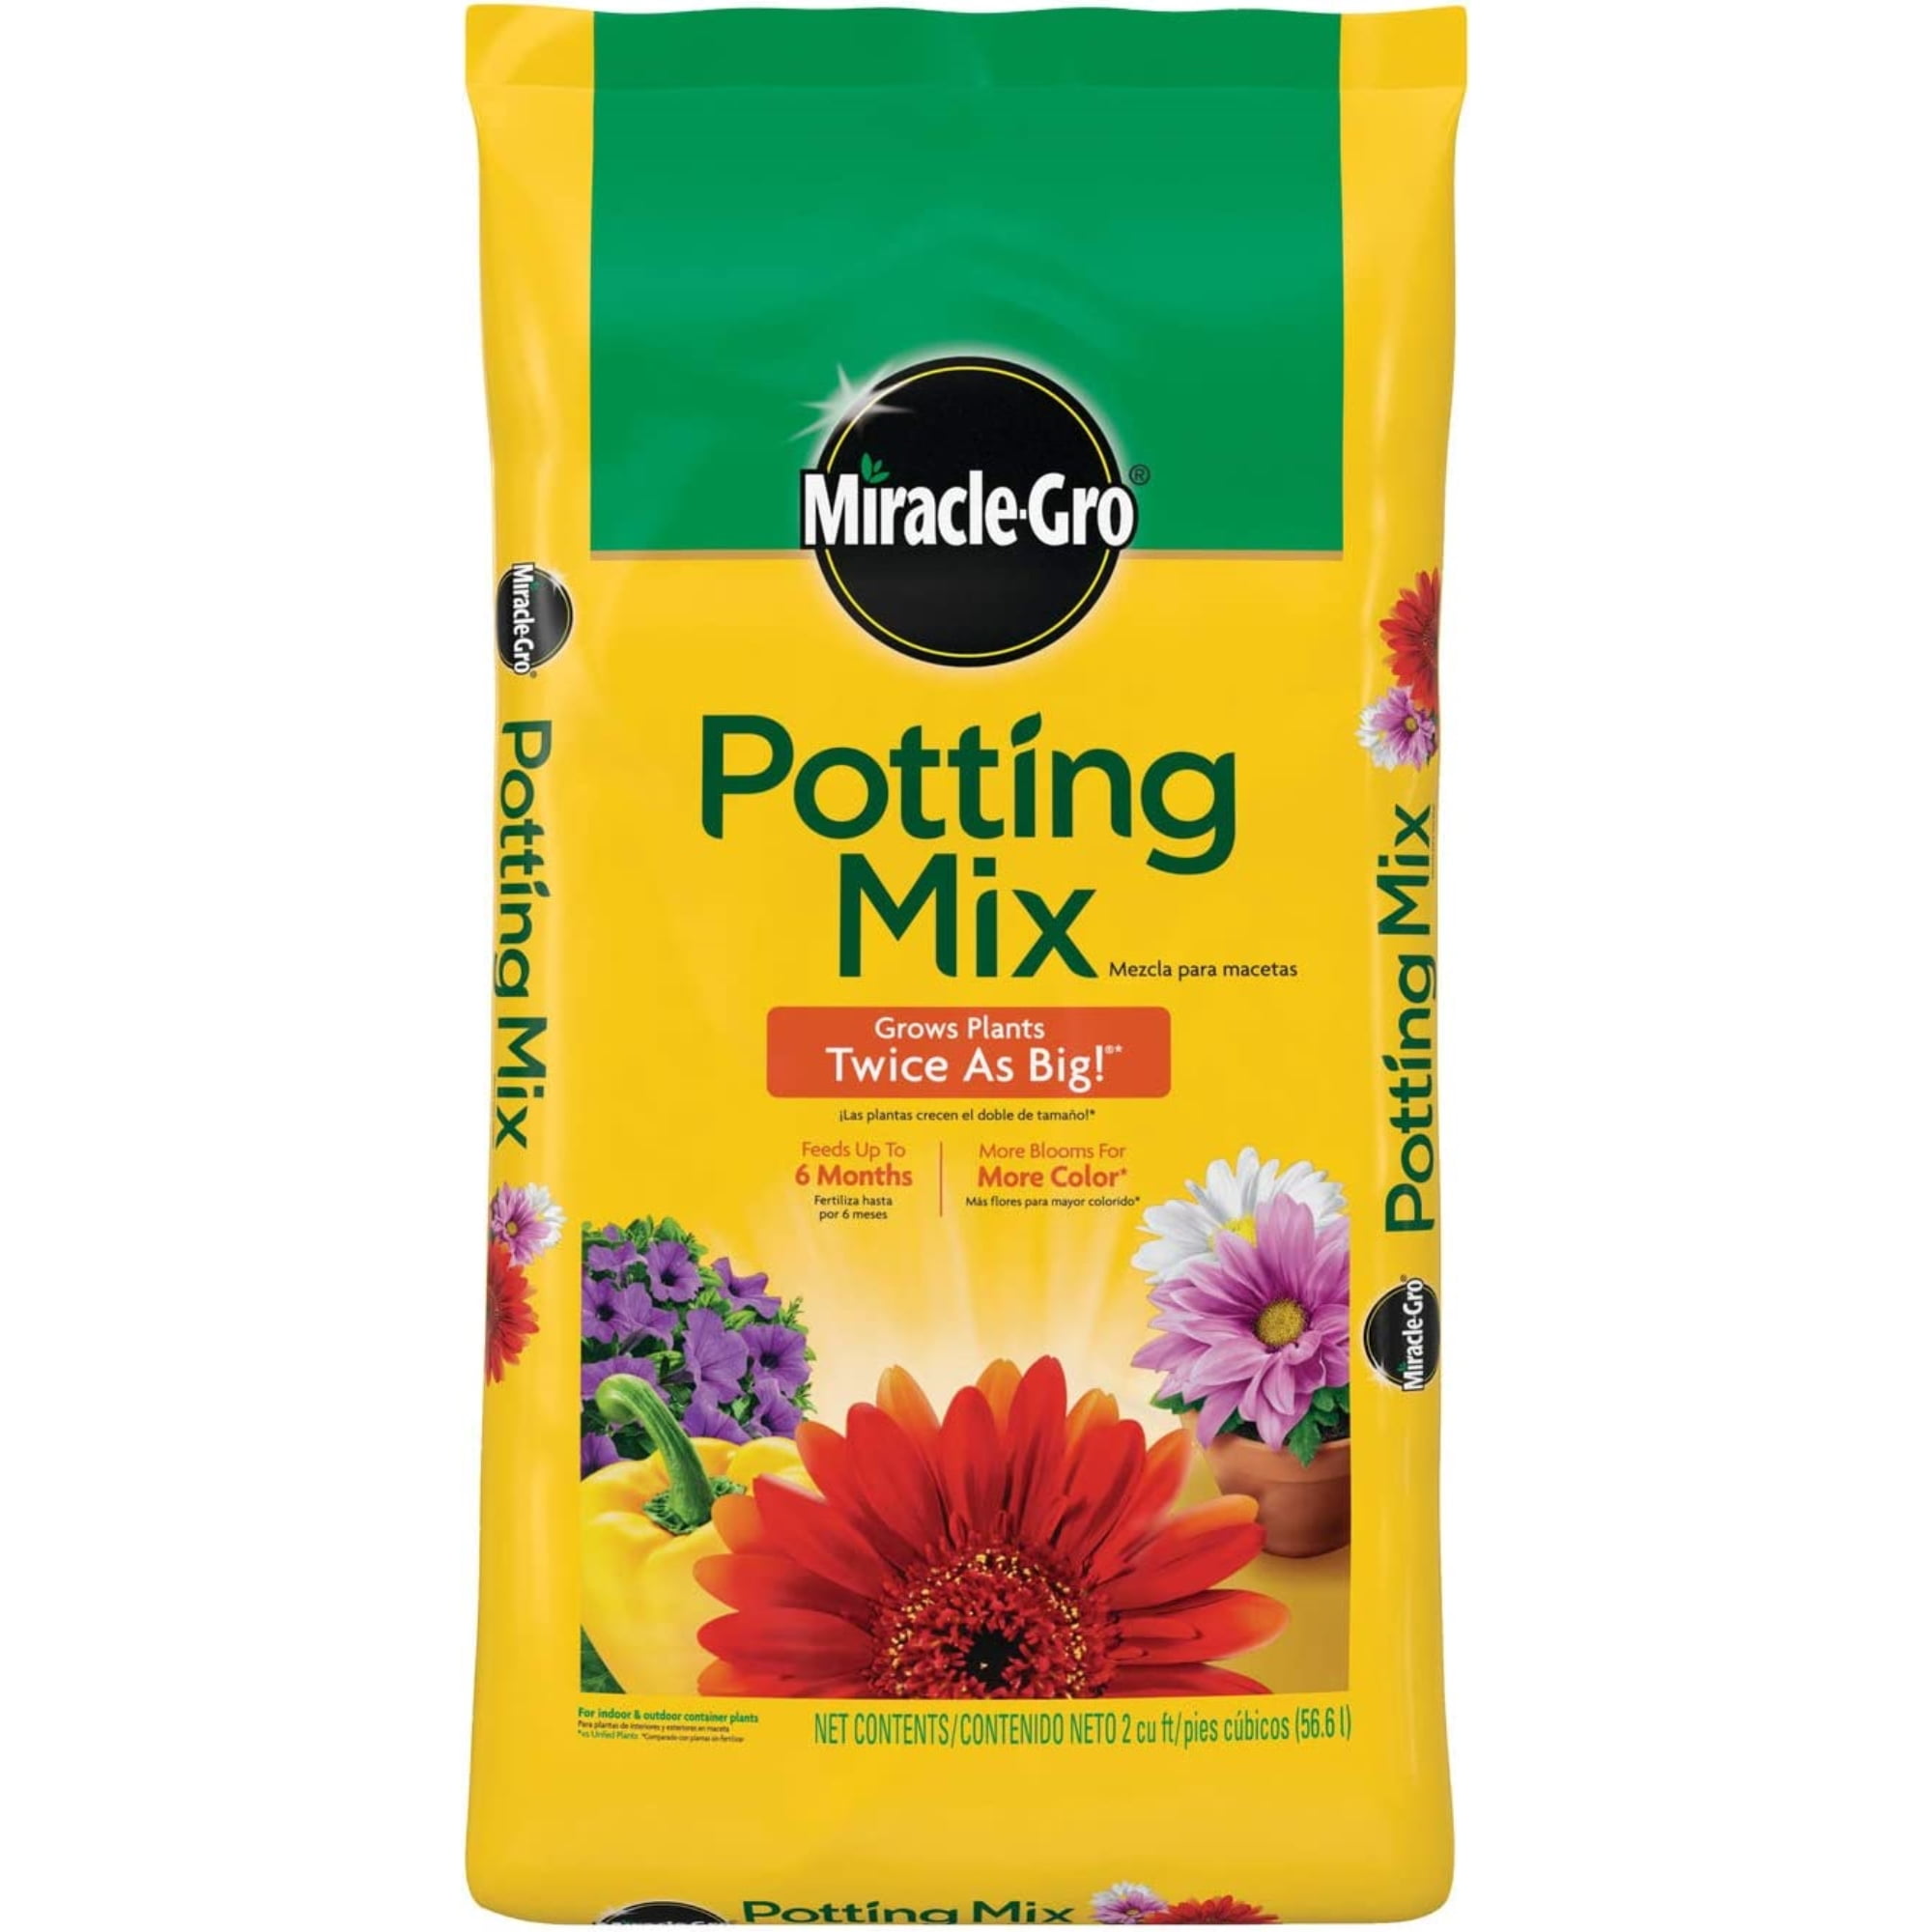 Miracle-Gro Moisture Control Potting Mix, 1 cu. ft., Feeds up to 6 Months 